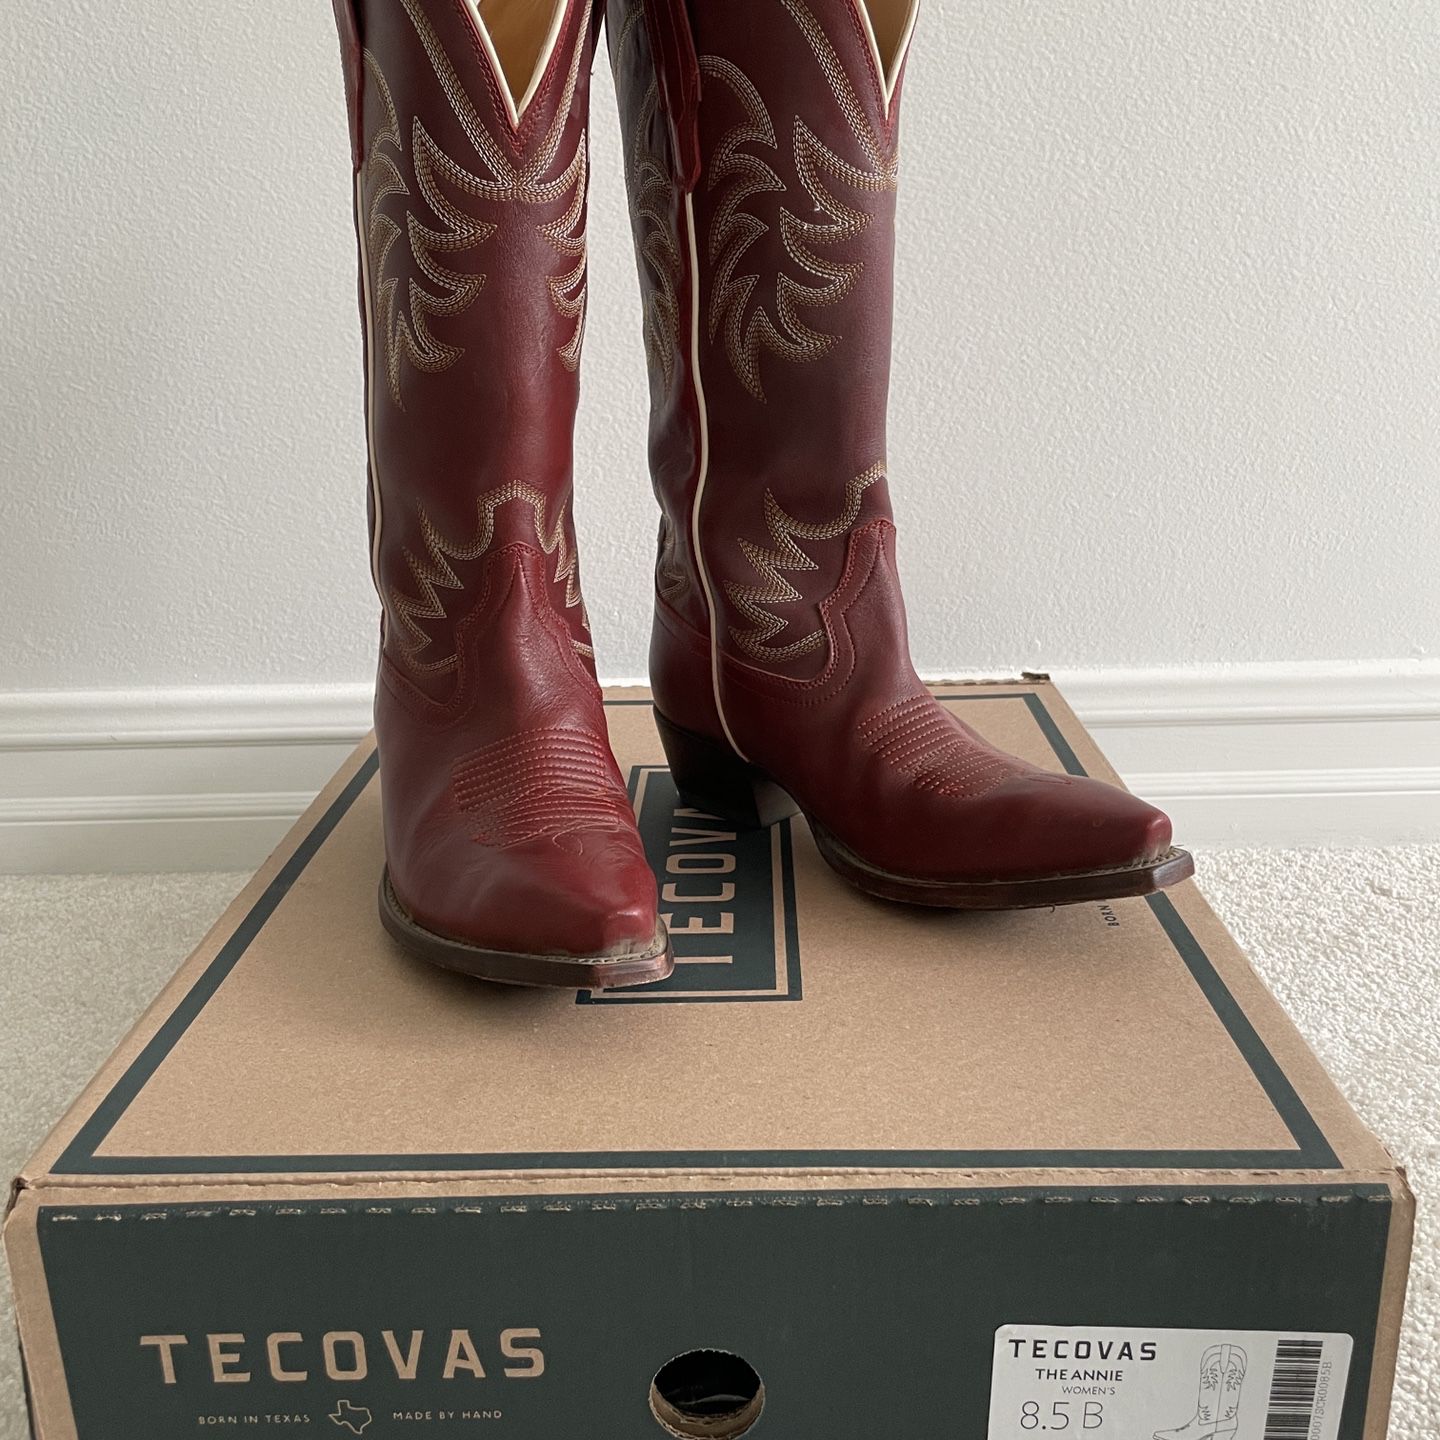 Tecovas “The Annie” leather Boots